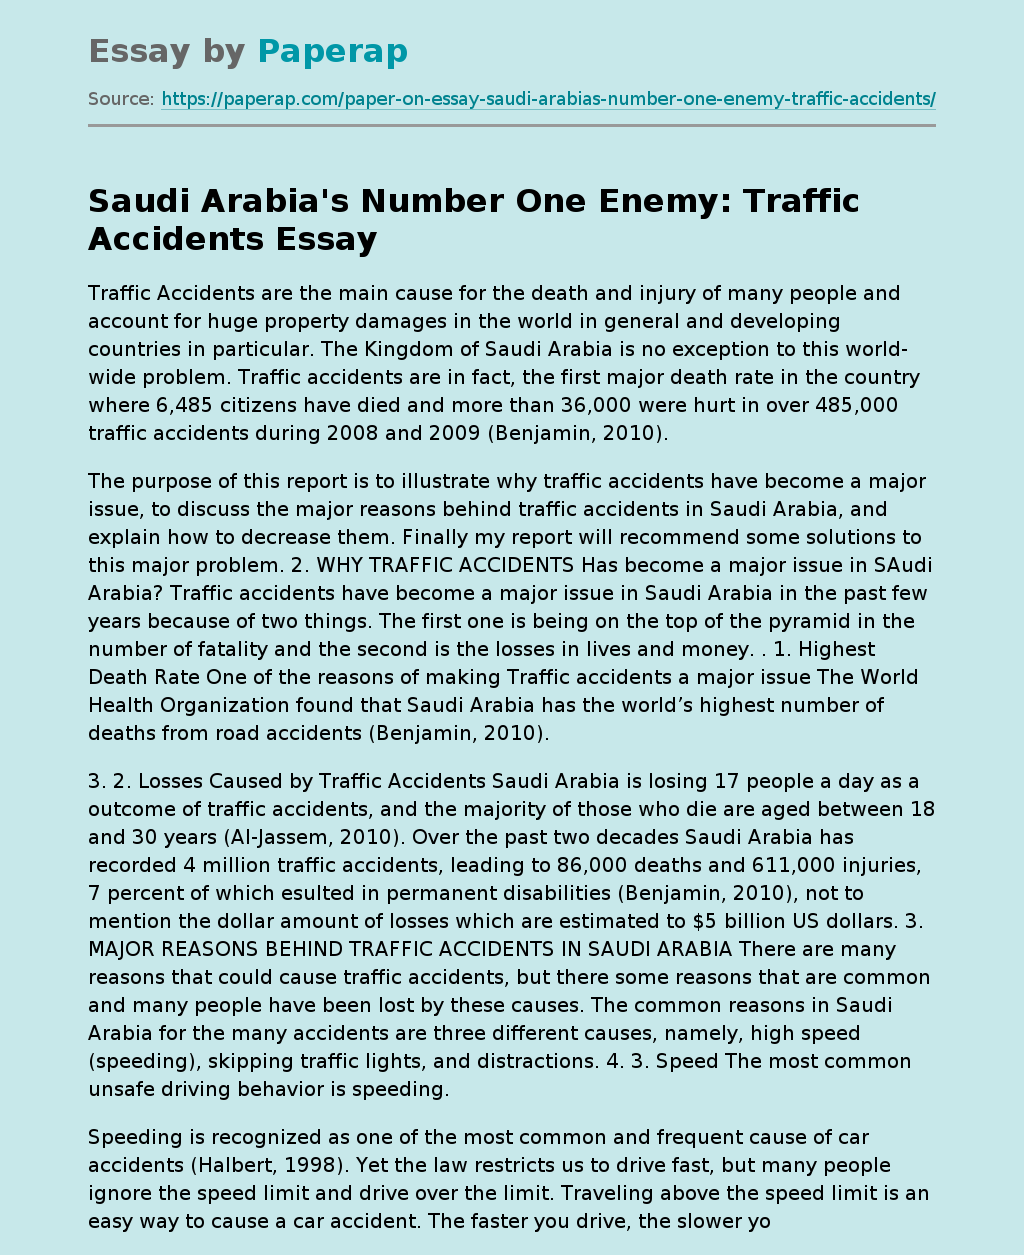 Saudi Arabia's Number One Enemy: Traffic Accidents